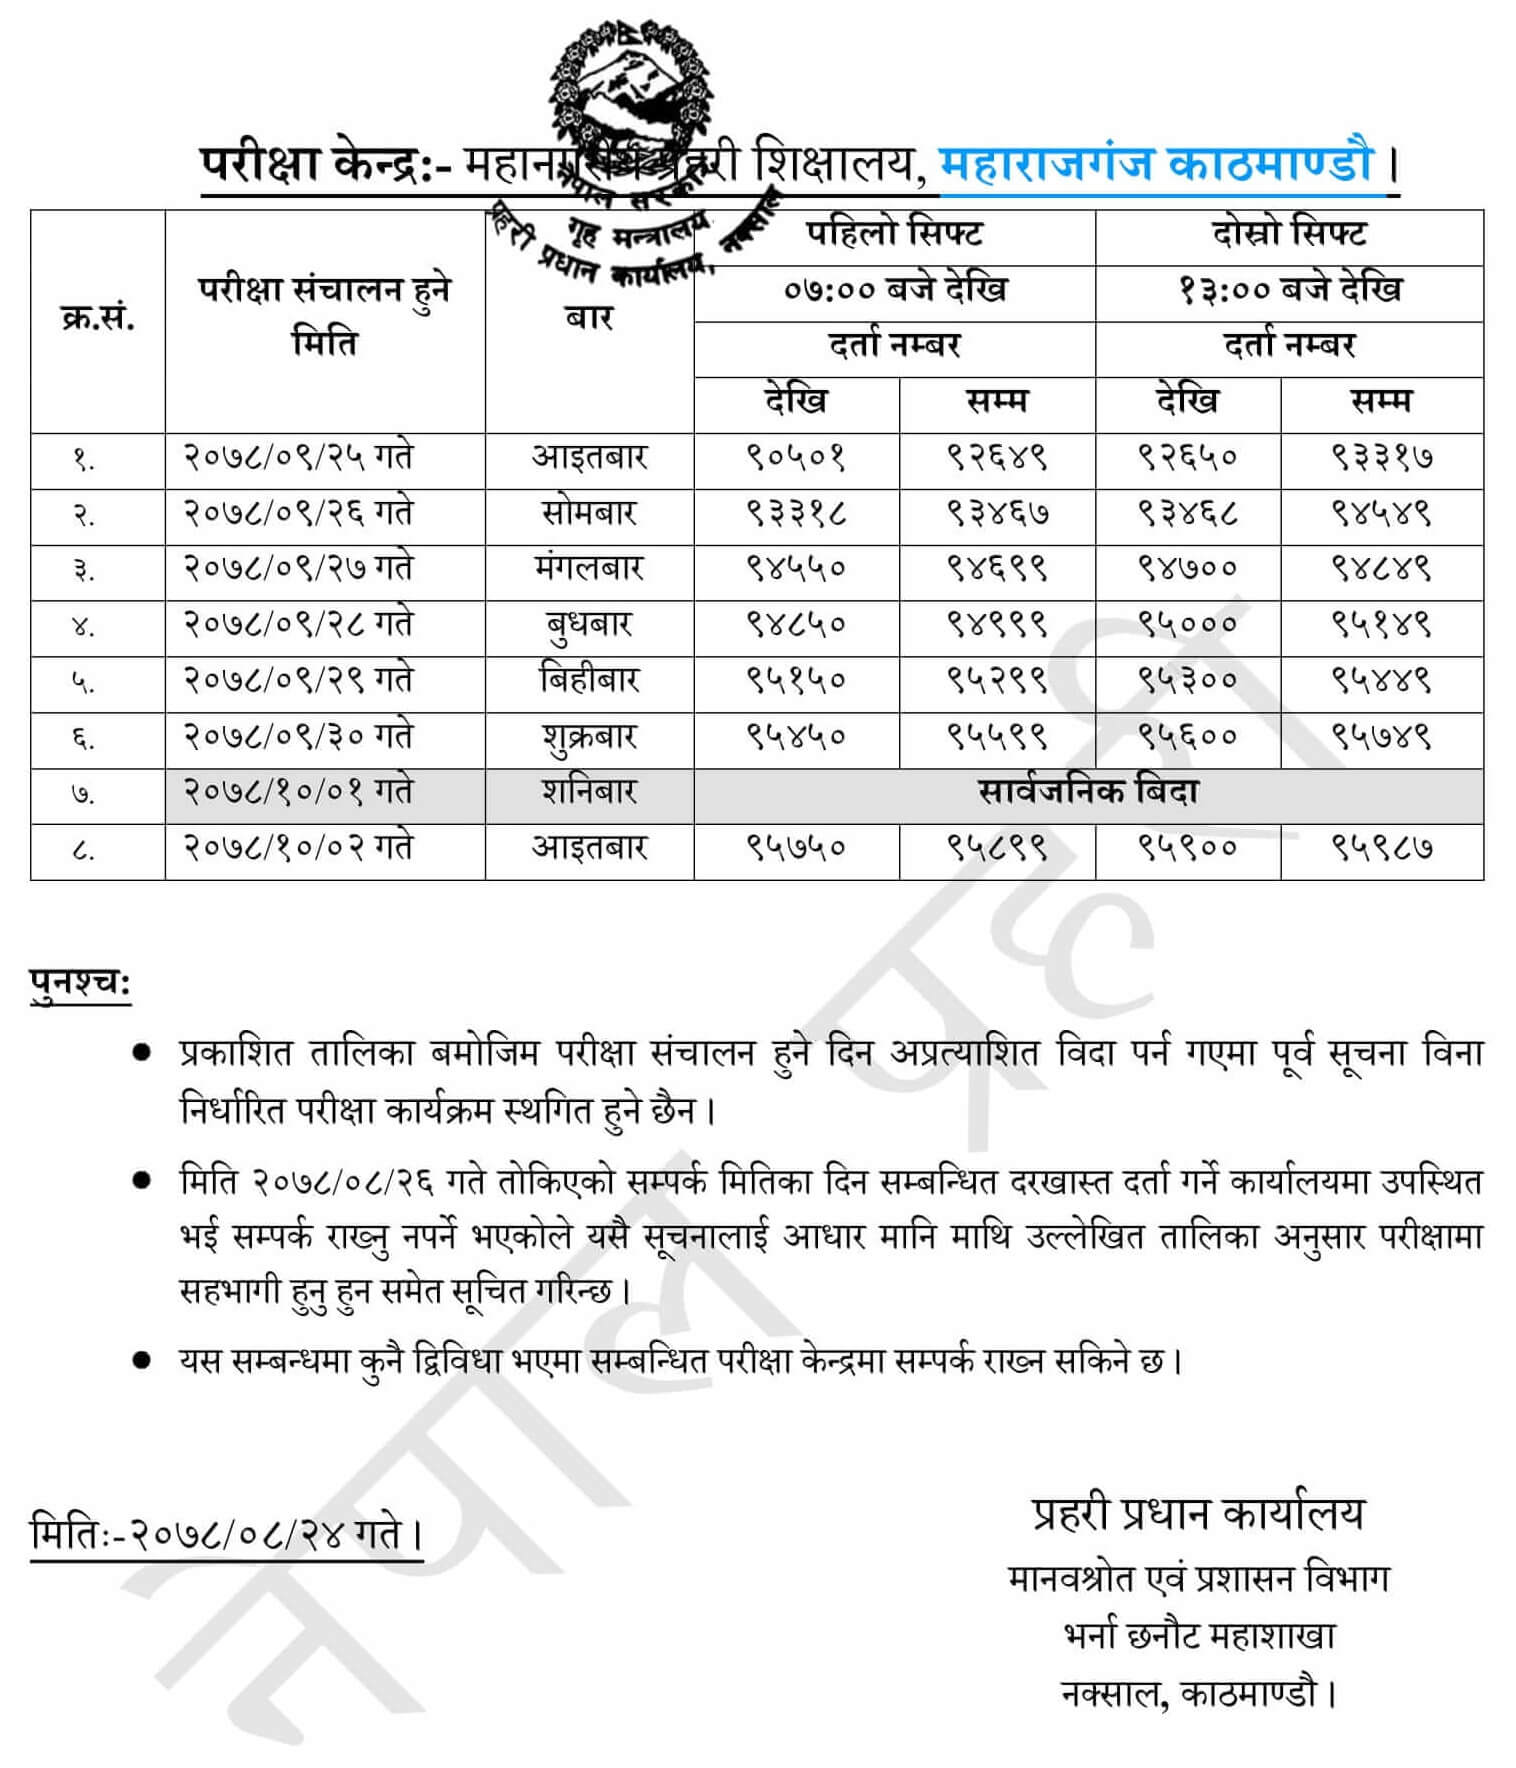 Nepal Police Technical Police Constable Physical Exam Schedule: